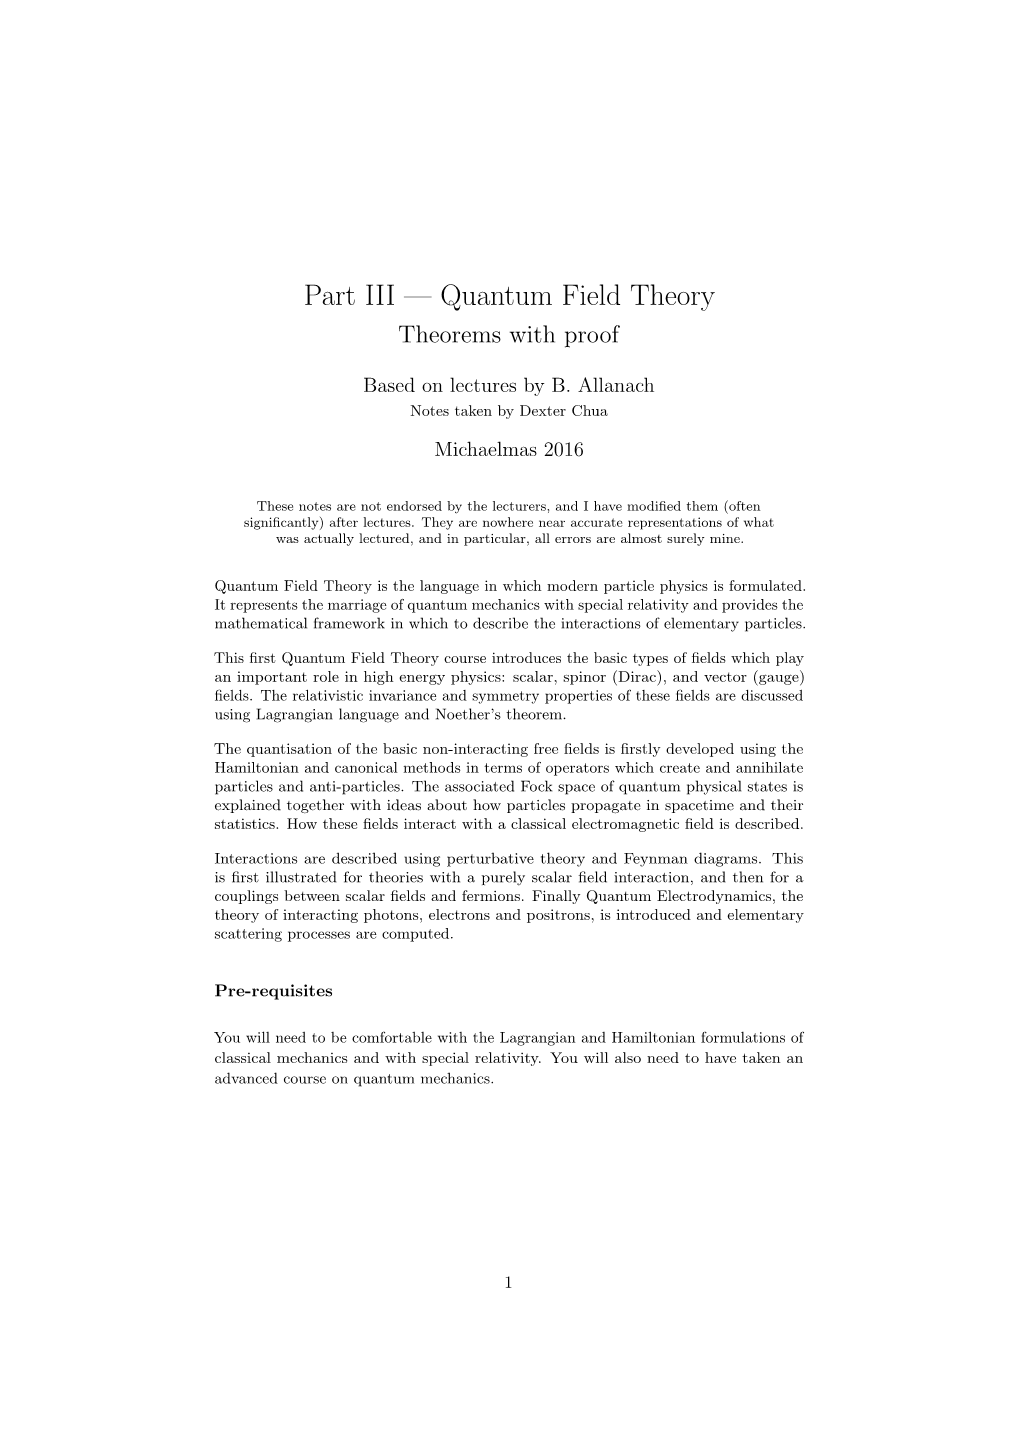 Part III — Quantum Field Theory Theorems with Proof